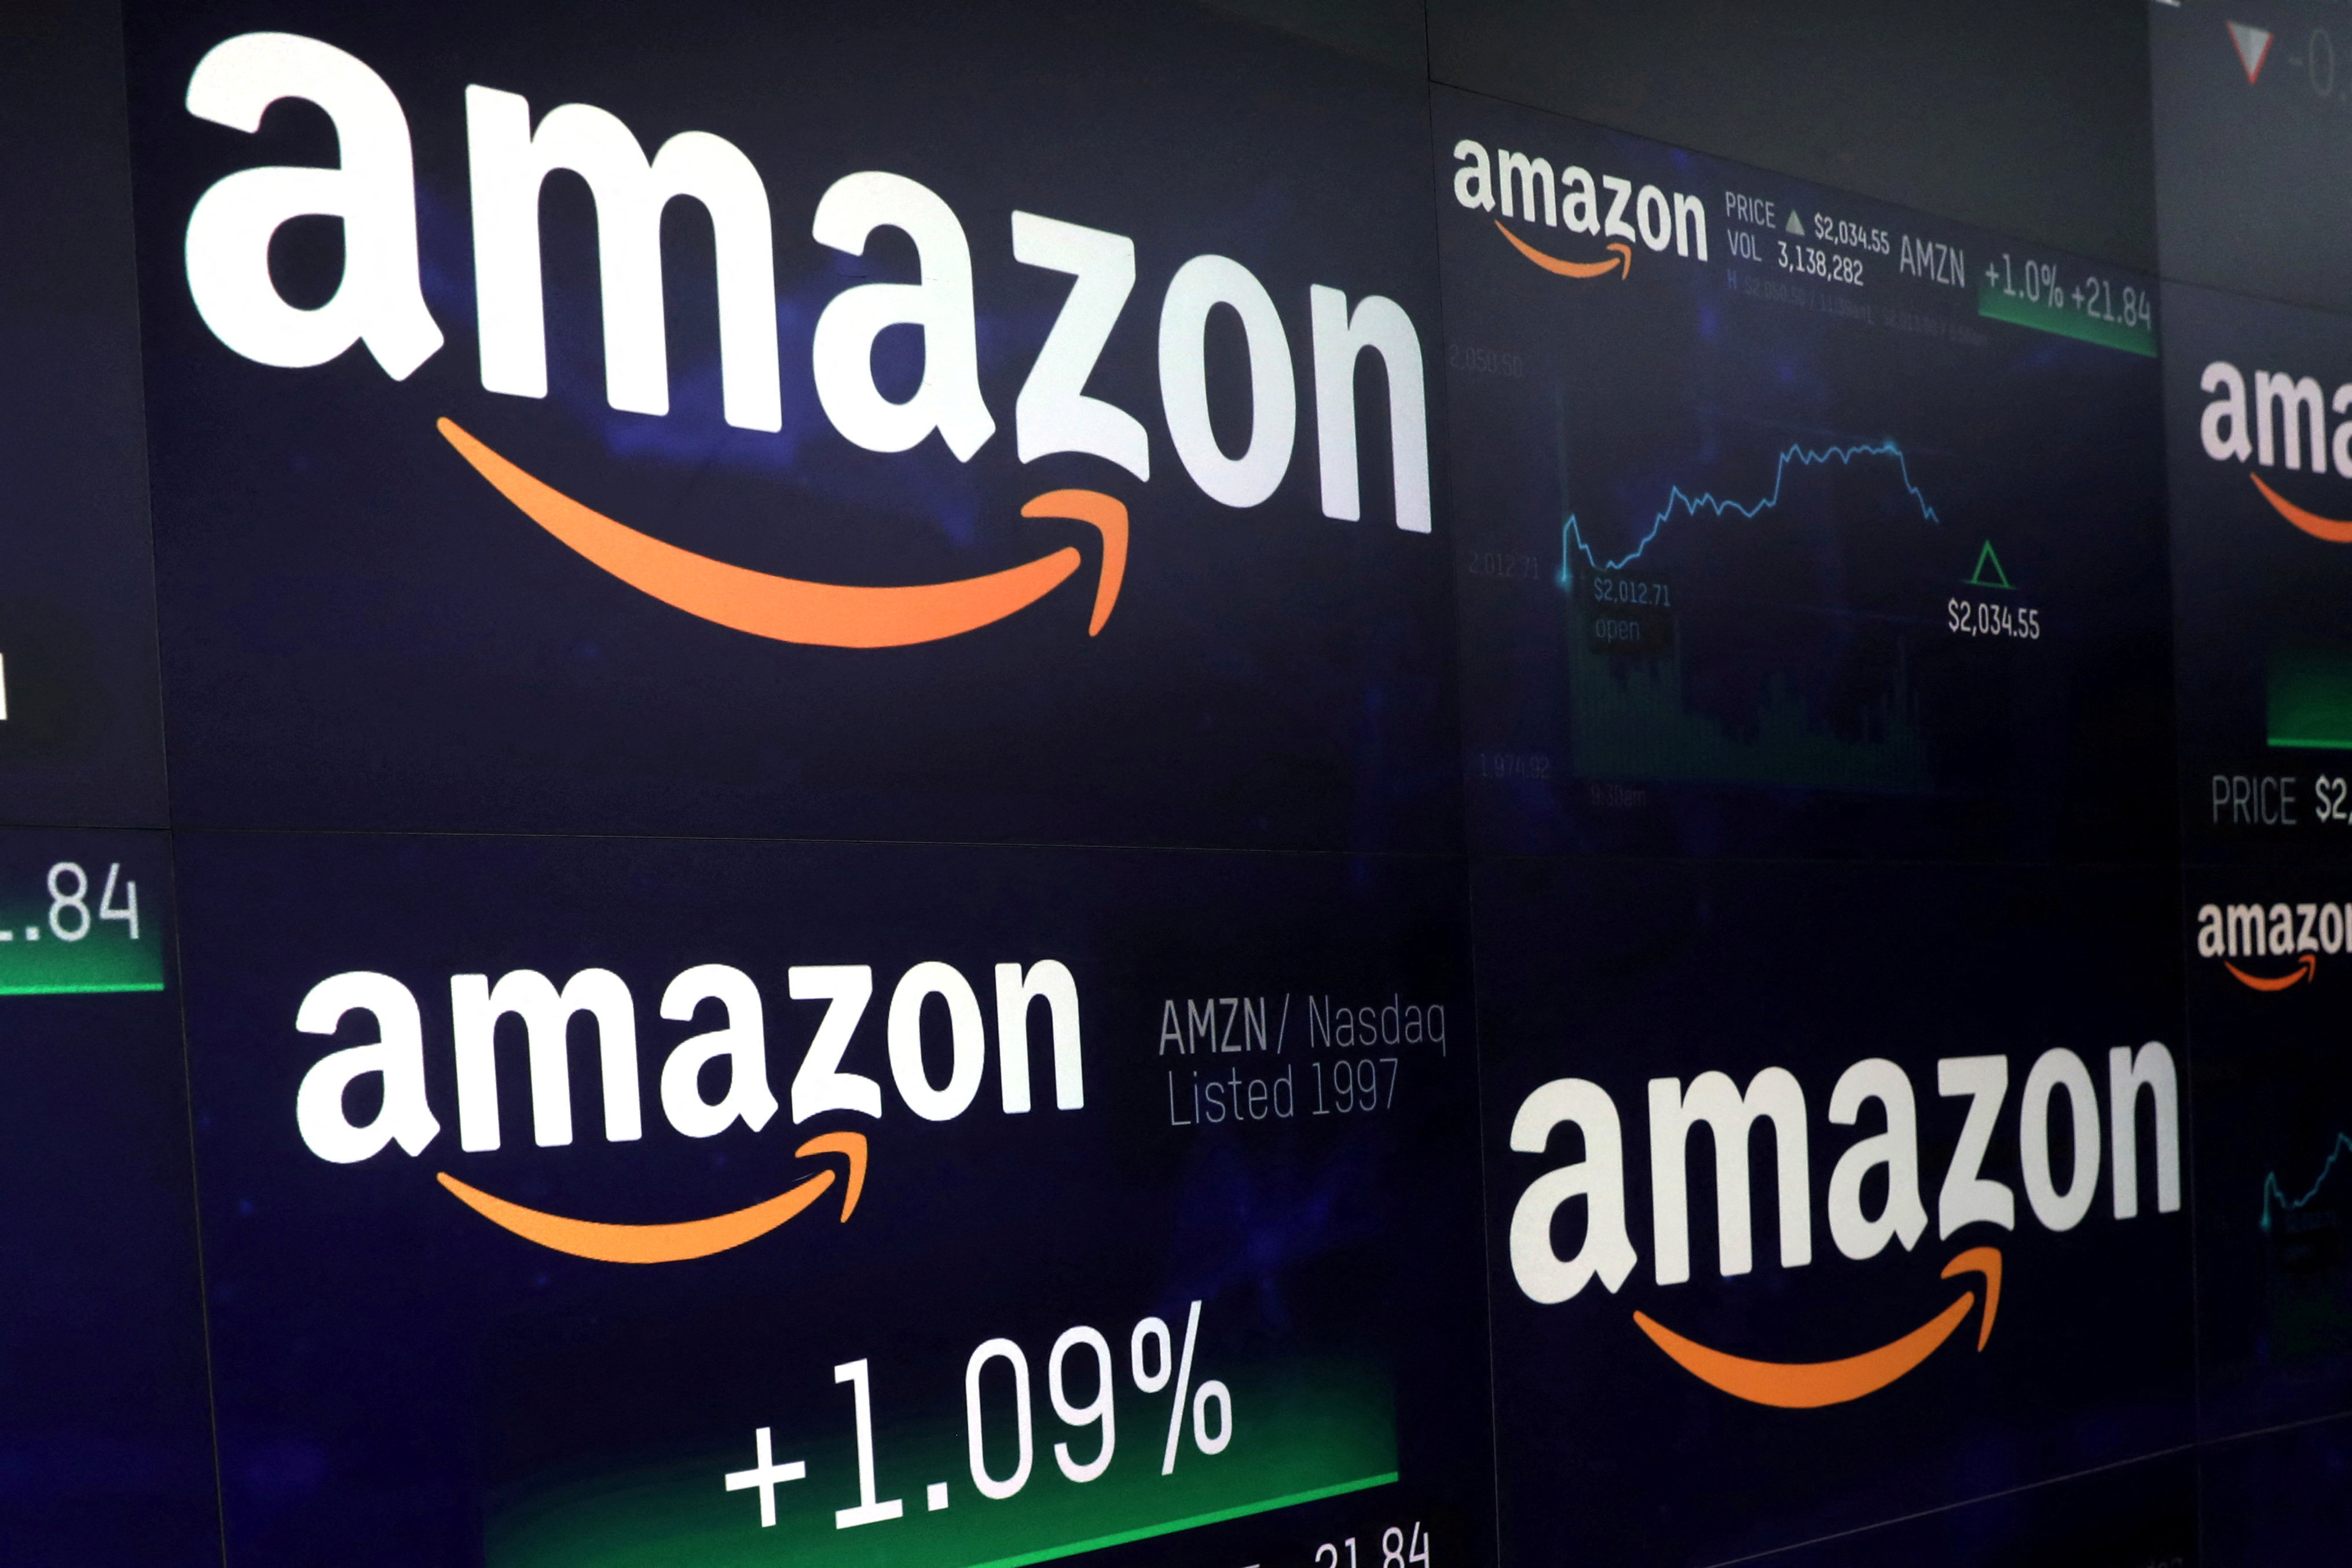 The Amazon.com logo and stock price information are seen on screens at the Nasdaq Market Site in New York on September 4, 2018. Photo: Reuters